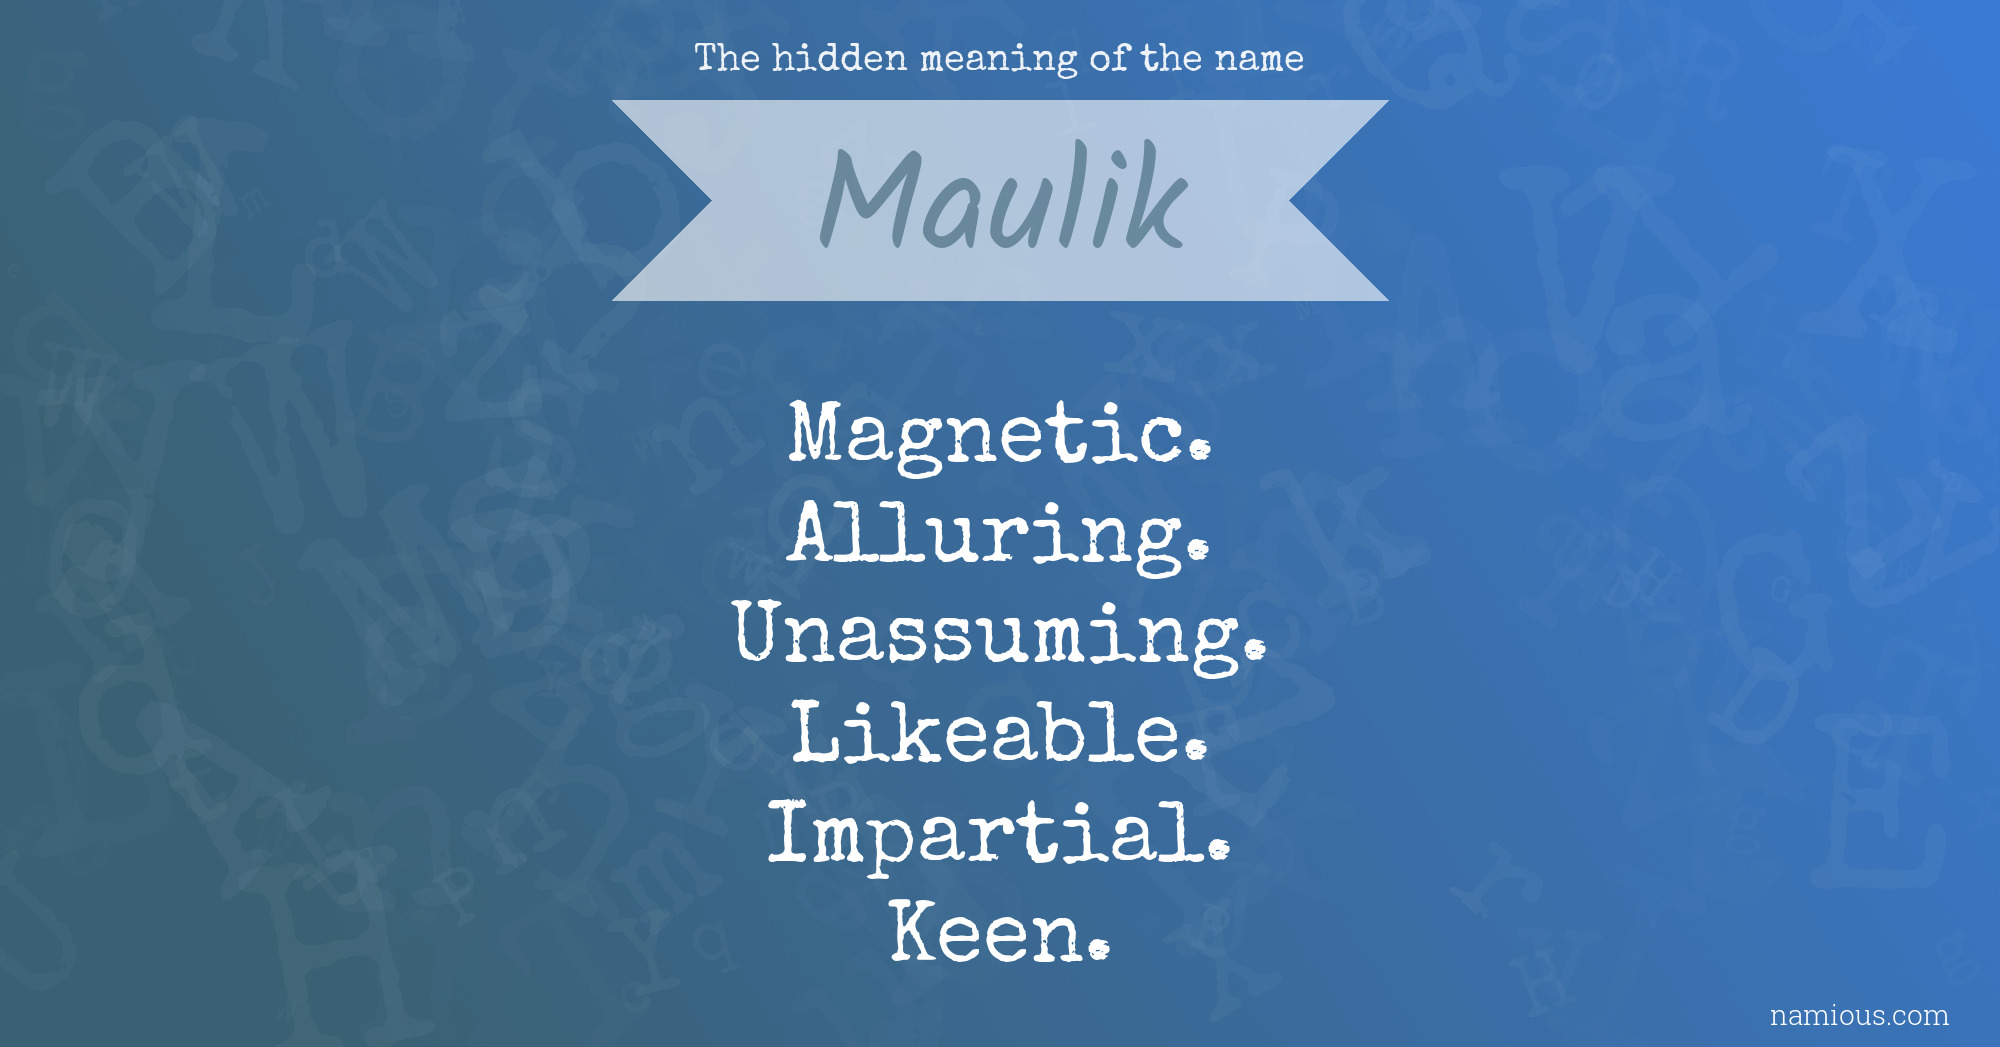 The hidden meaning of the name Maulik